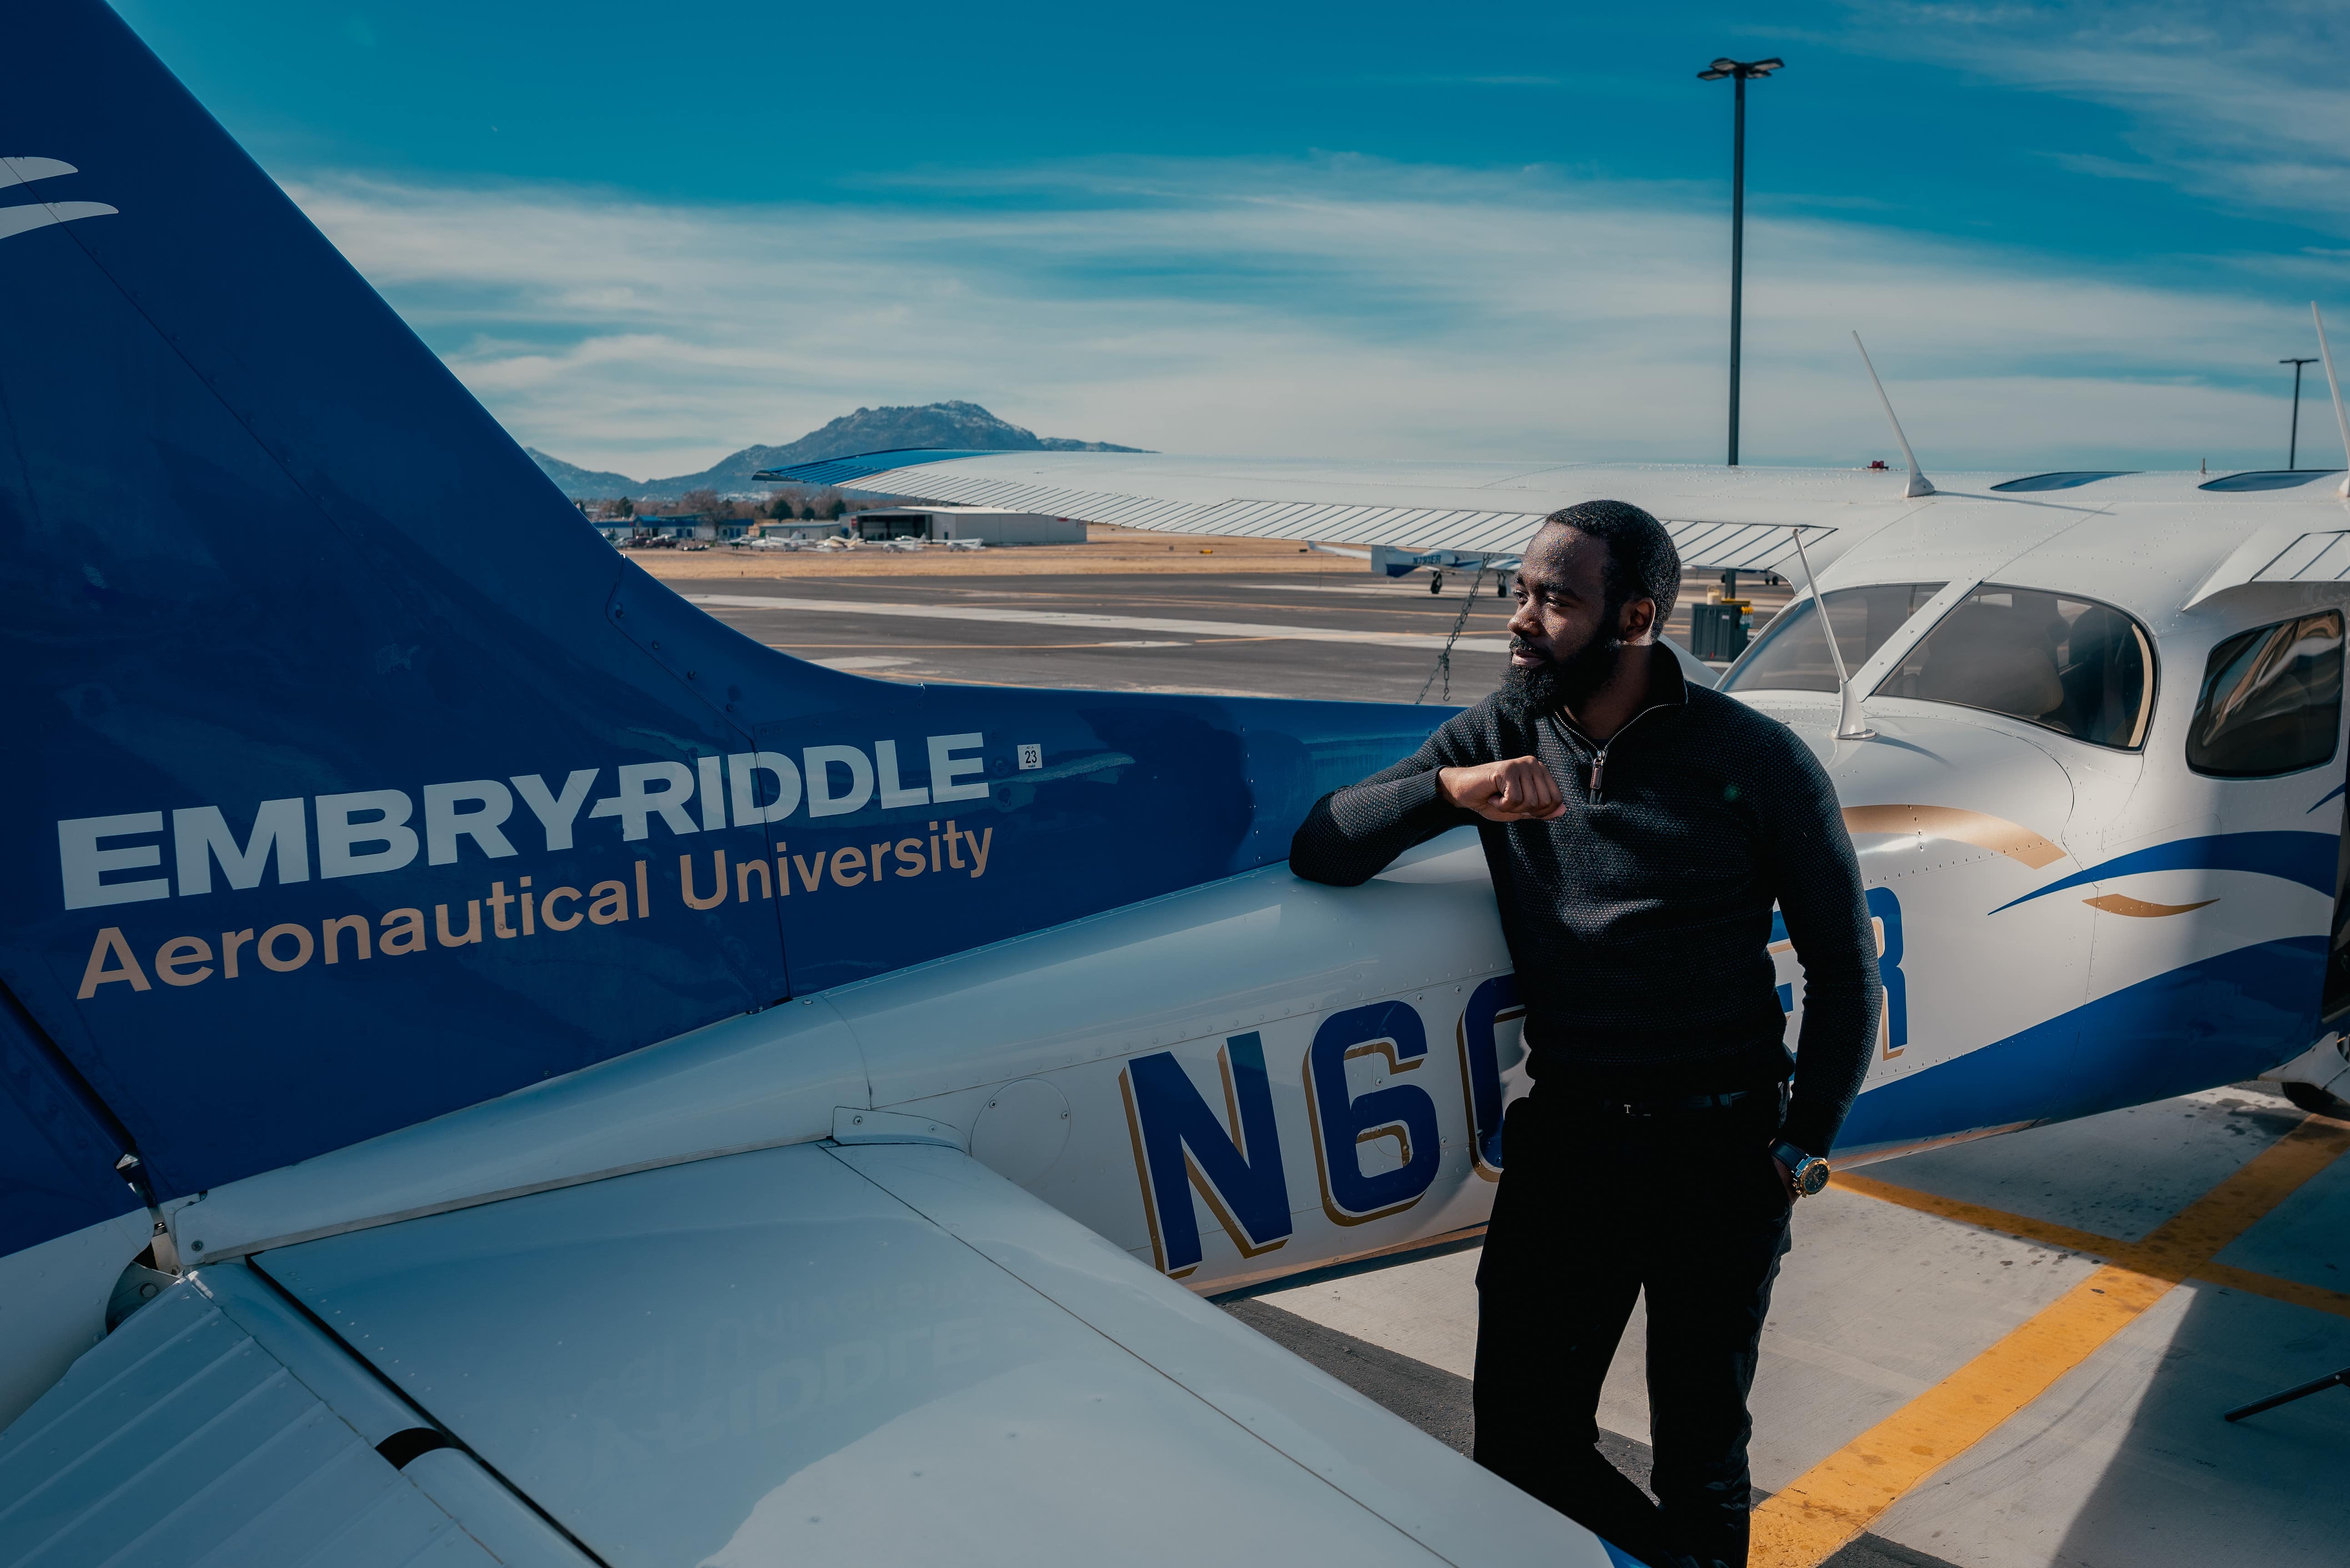 A student with a beard leans against a small aircraft. Prescott's Granite Mountain can be seen in the background.